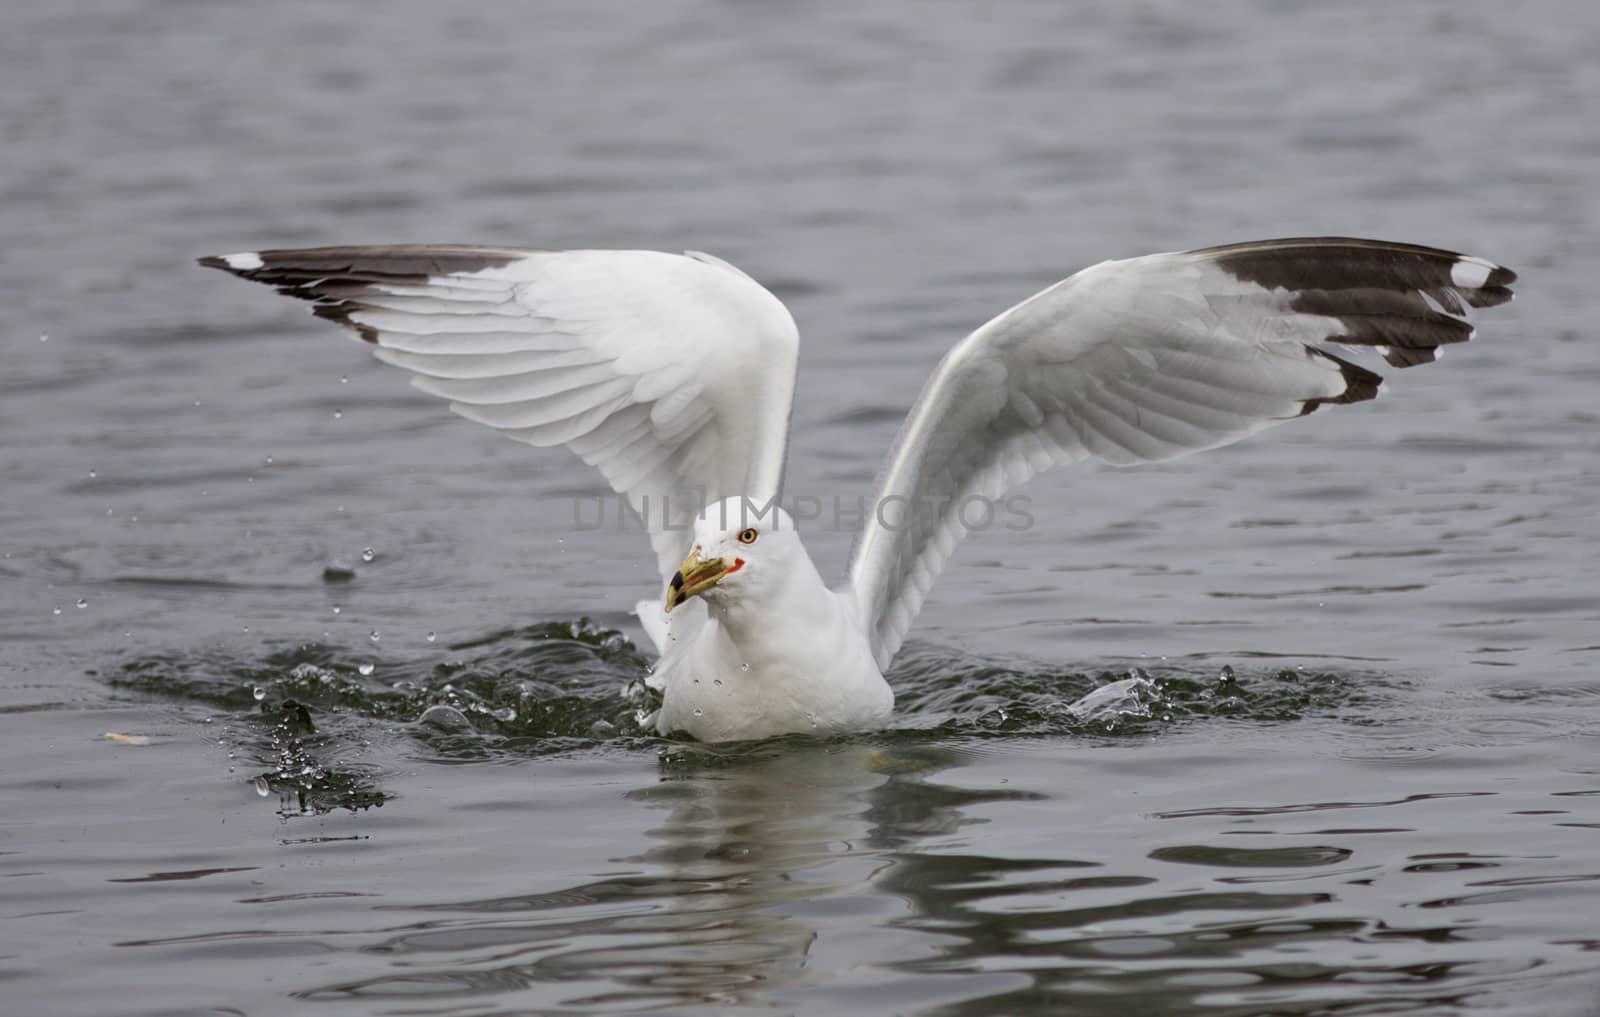 Photo of a gull found the food in the lake